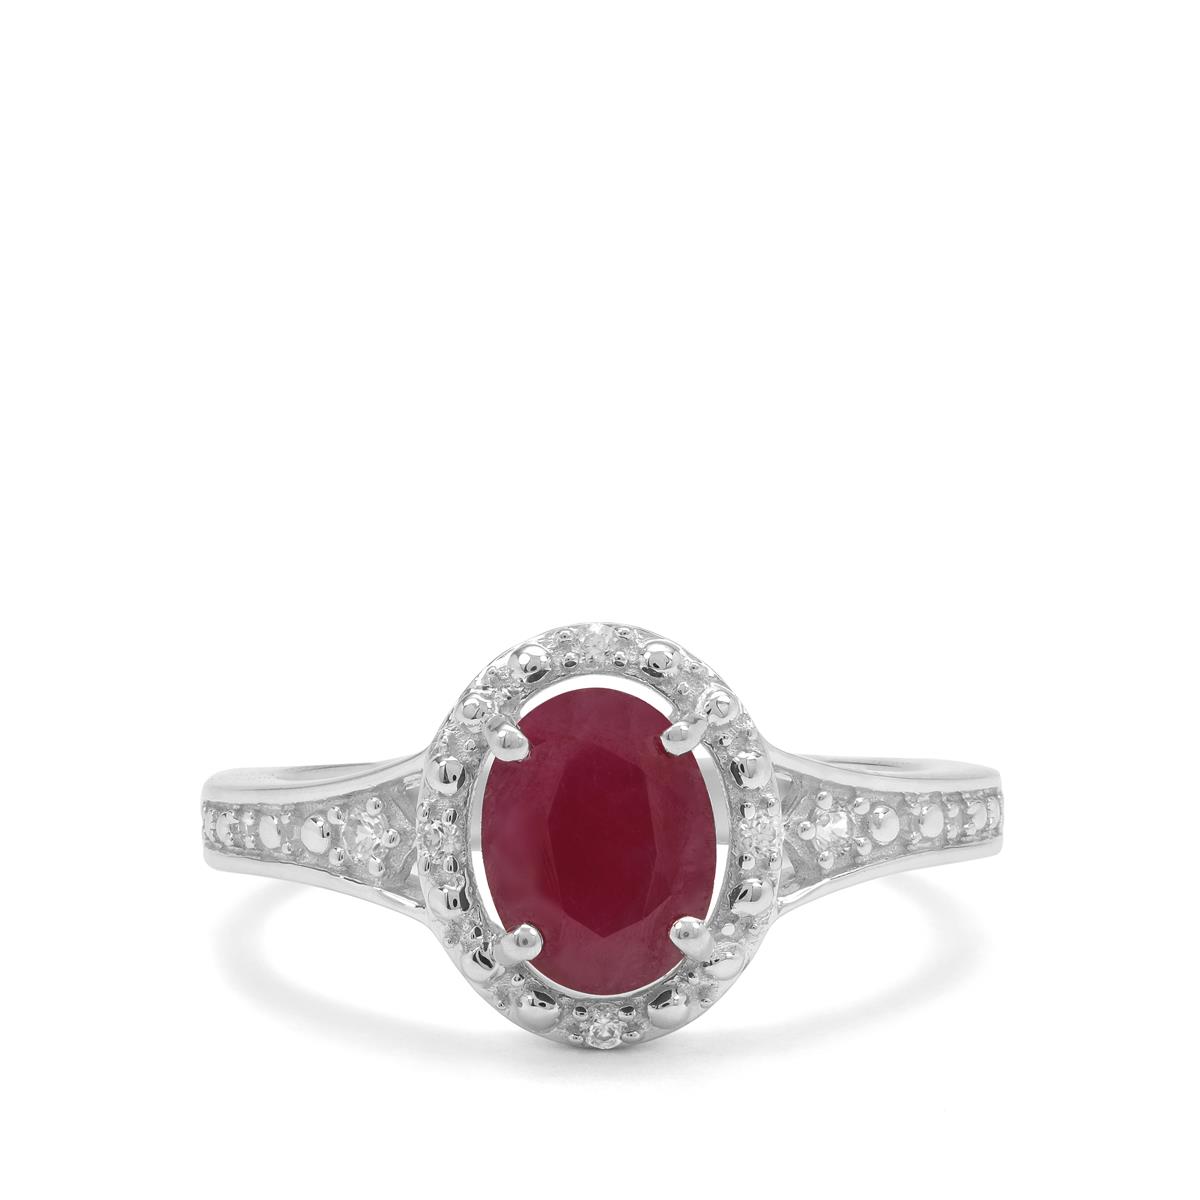 Bharat Ruby & White Zircon Sterling Silver Ring ATGW 1.95cts | Gemporia